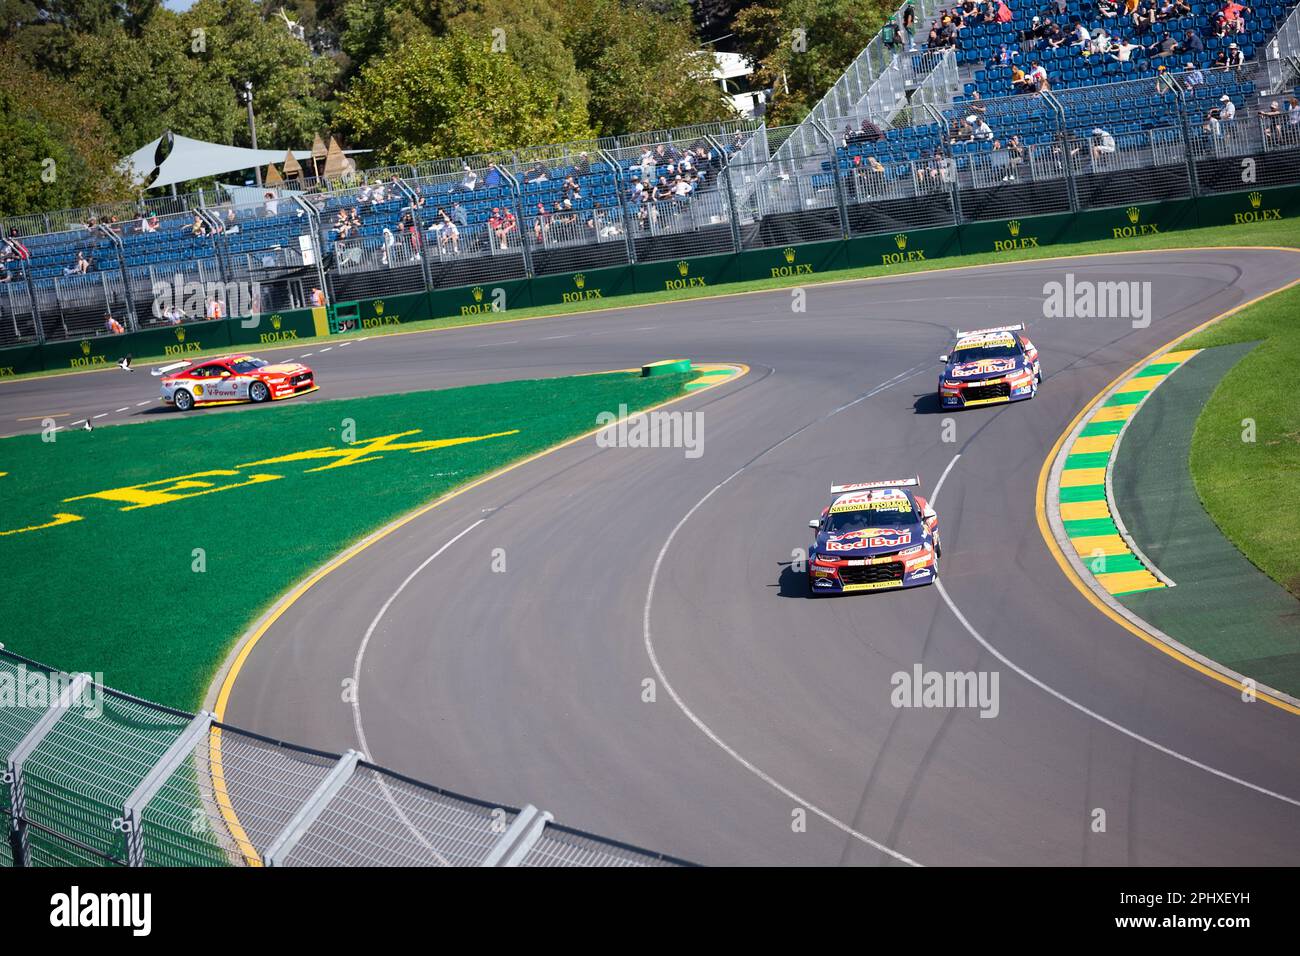 Melbourne, Australia, 30 March, 2023. Broc Feeney (88) driving for Triple Eight Race Engineering during The Australian Formula One Grand Prix on March 30, 2023, at The Melbourne Grand Prix Circuit in Albert Park, Australia. Credit: Dave Hewison/Speed Media/Alamy Live News Stock Photo